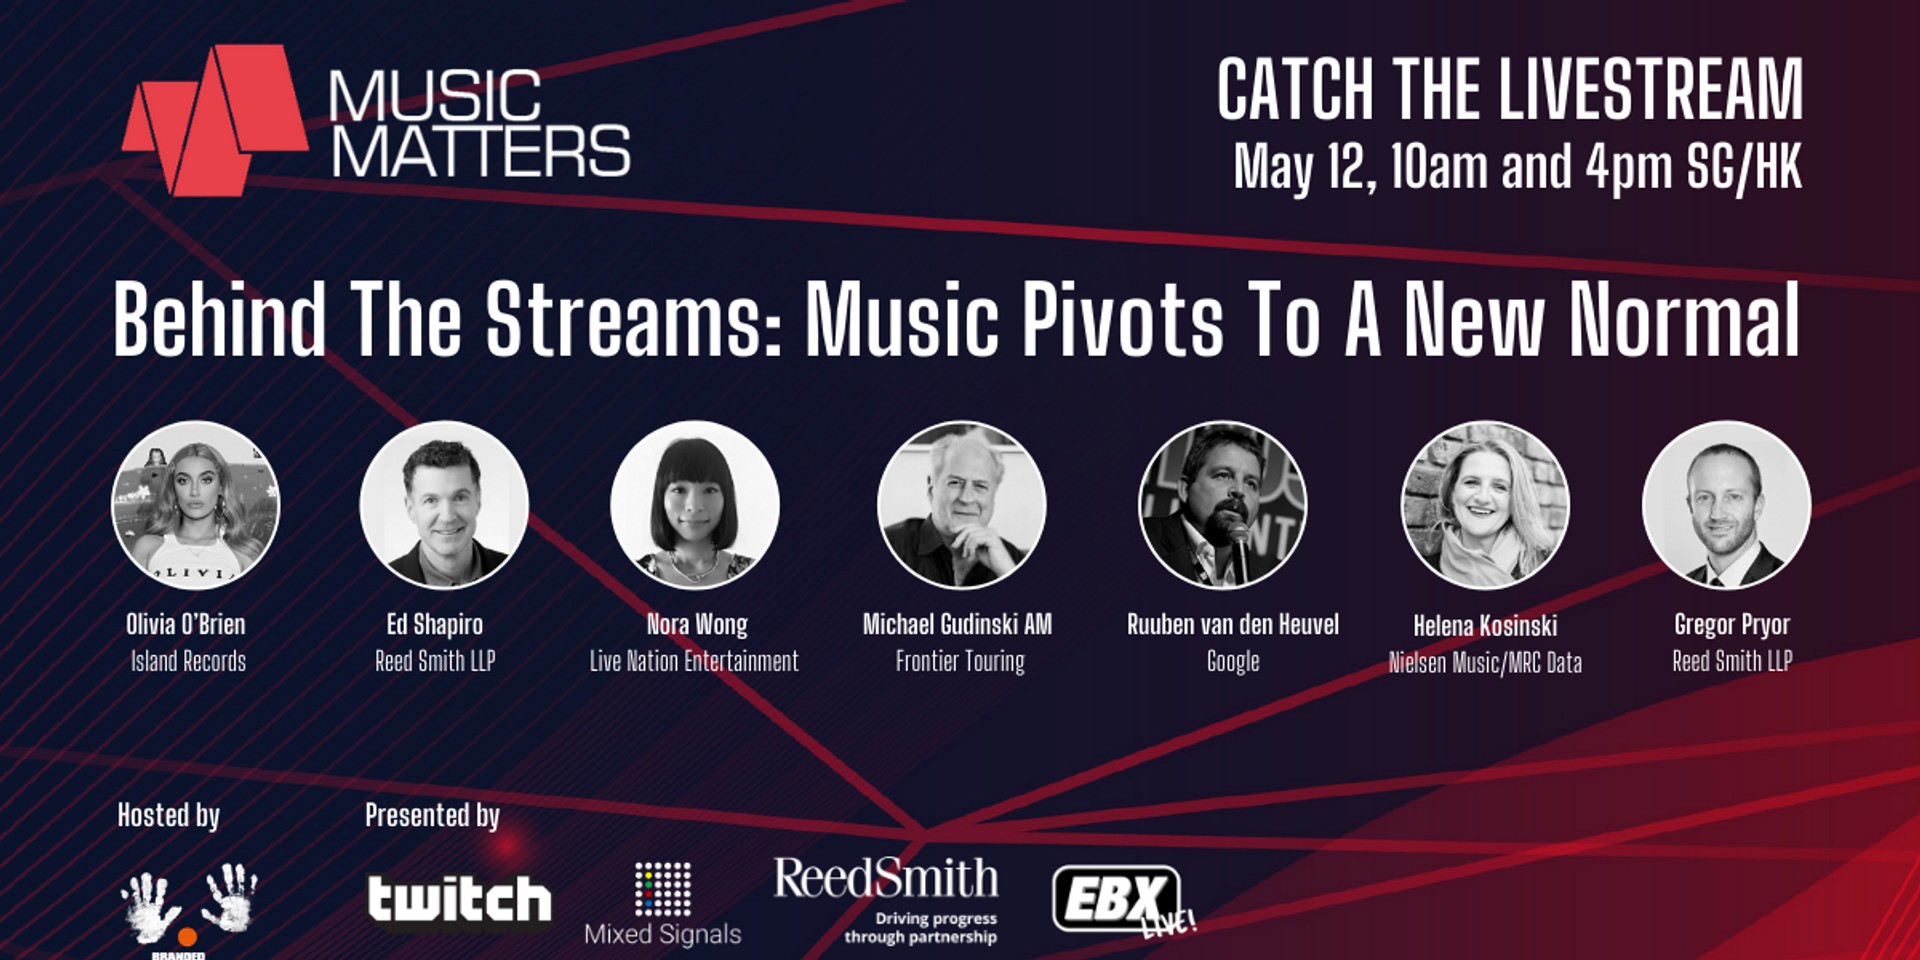 Tune into Music Matters: Behind the Streams this Tuesday to find out more about livestreaming